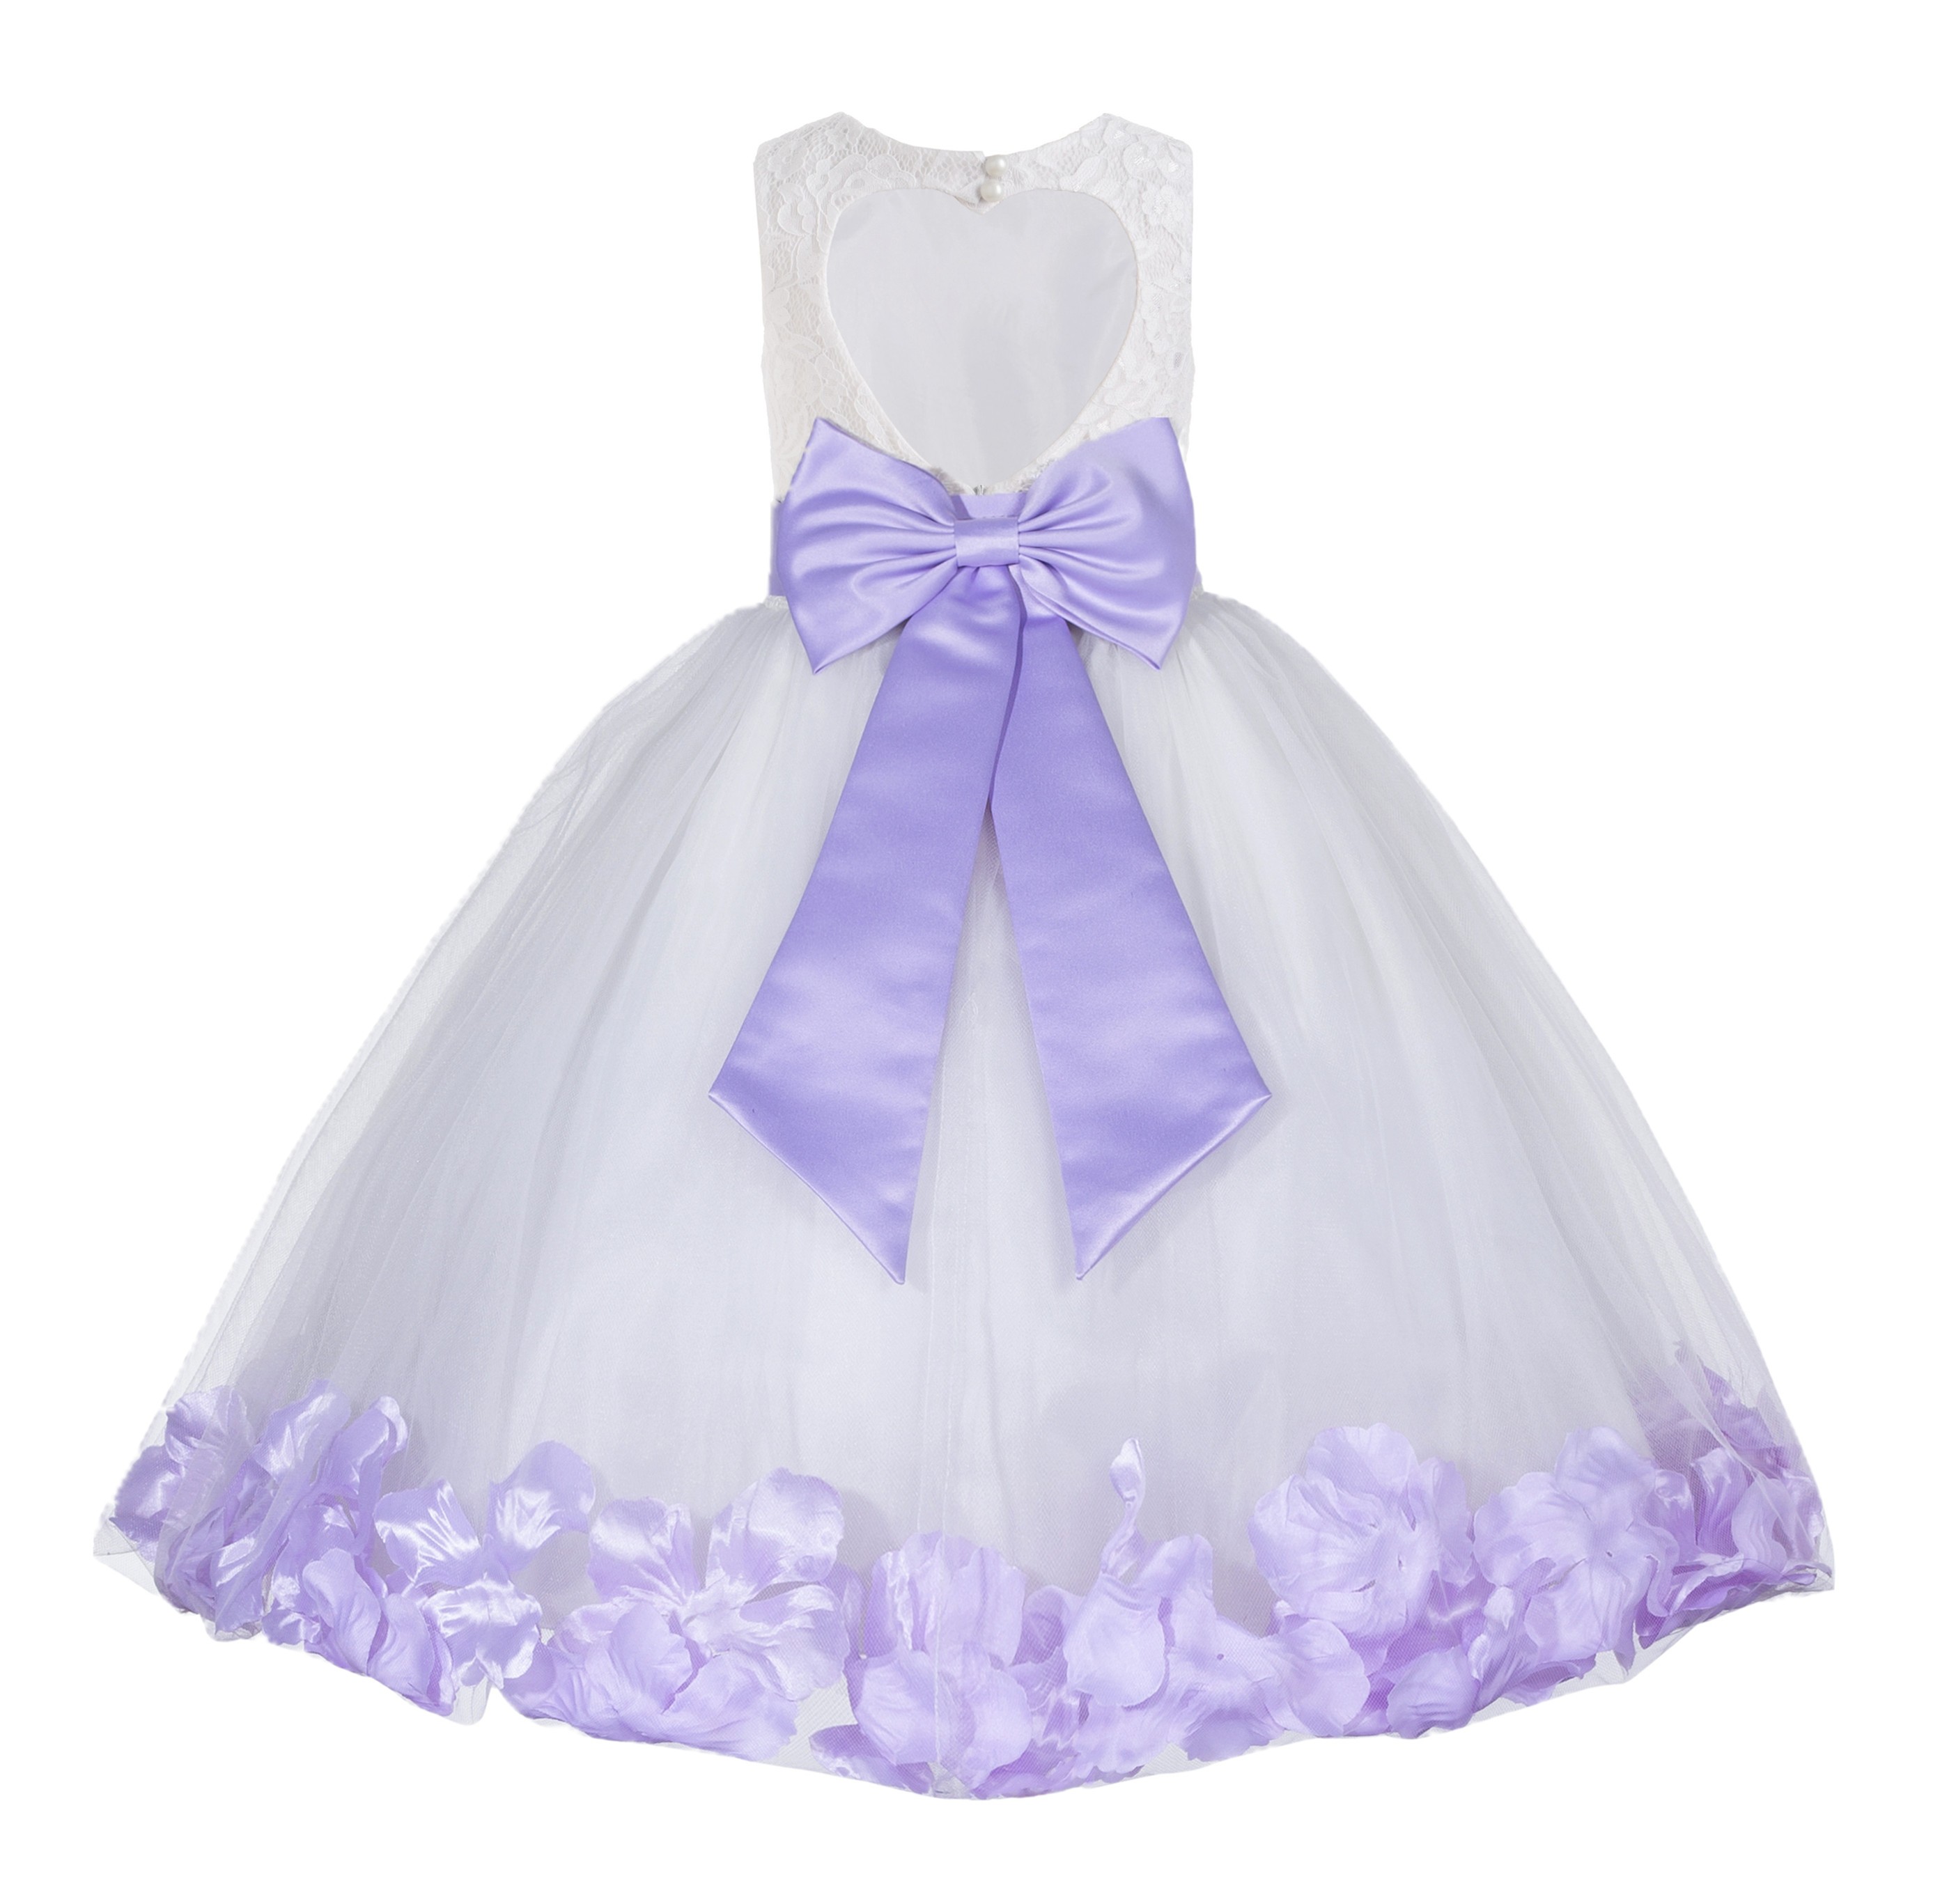 White / Lilac Floral Lace Heart Cutout Flower Girl Dress with Petals 185T